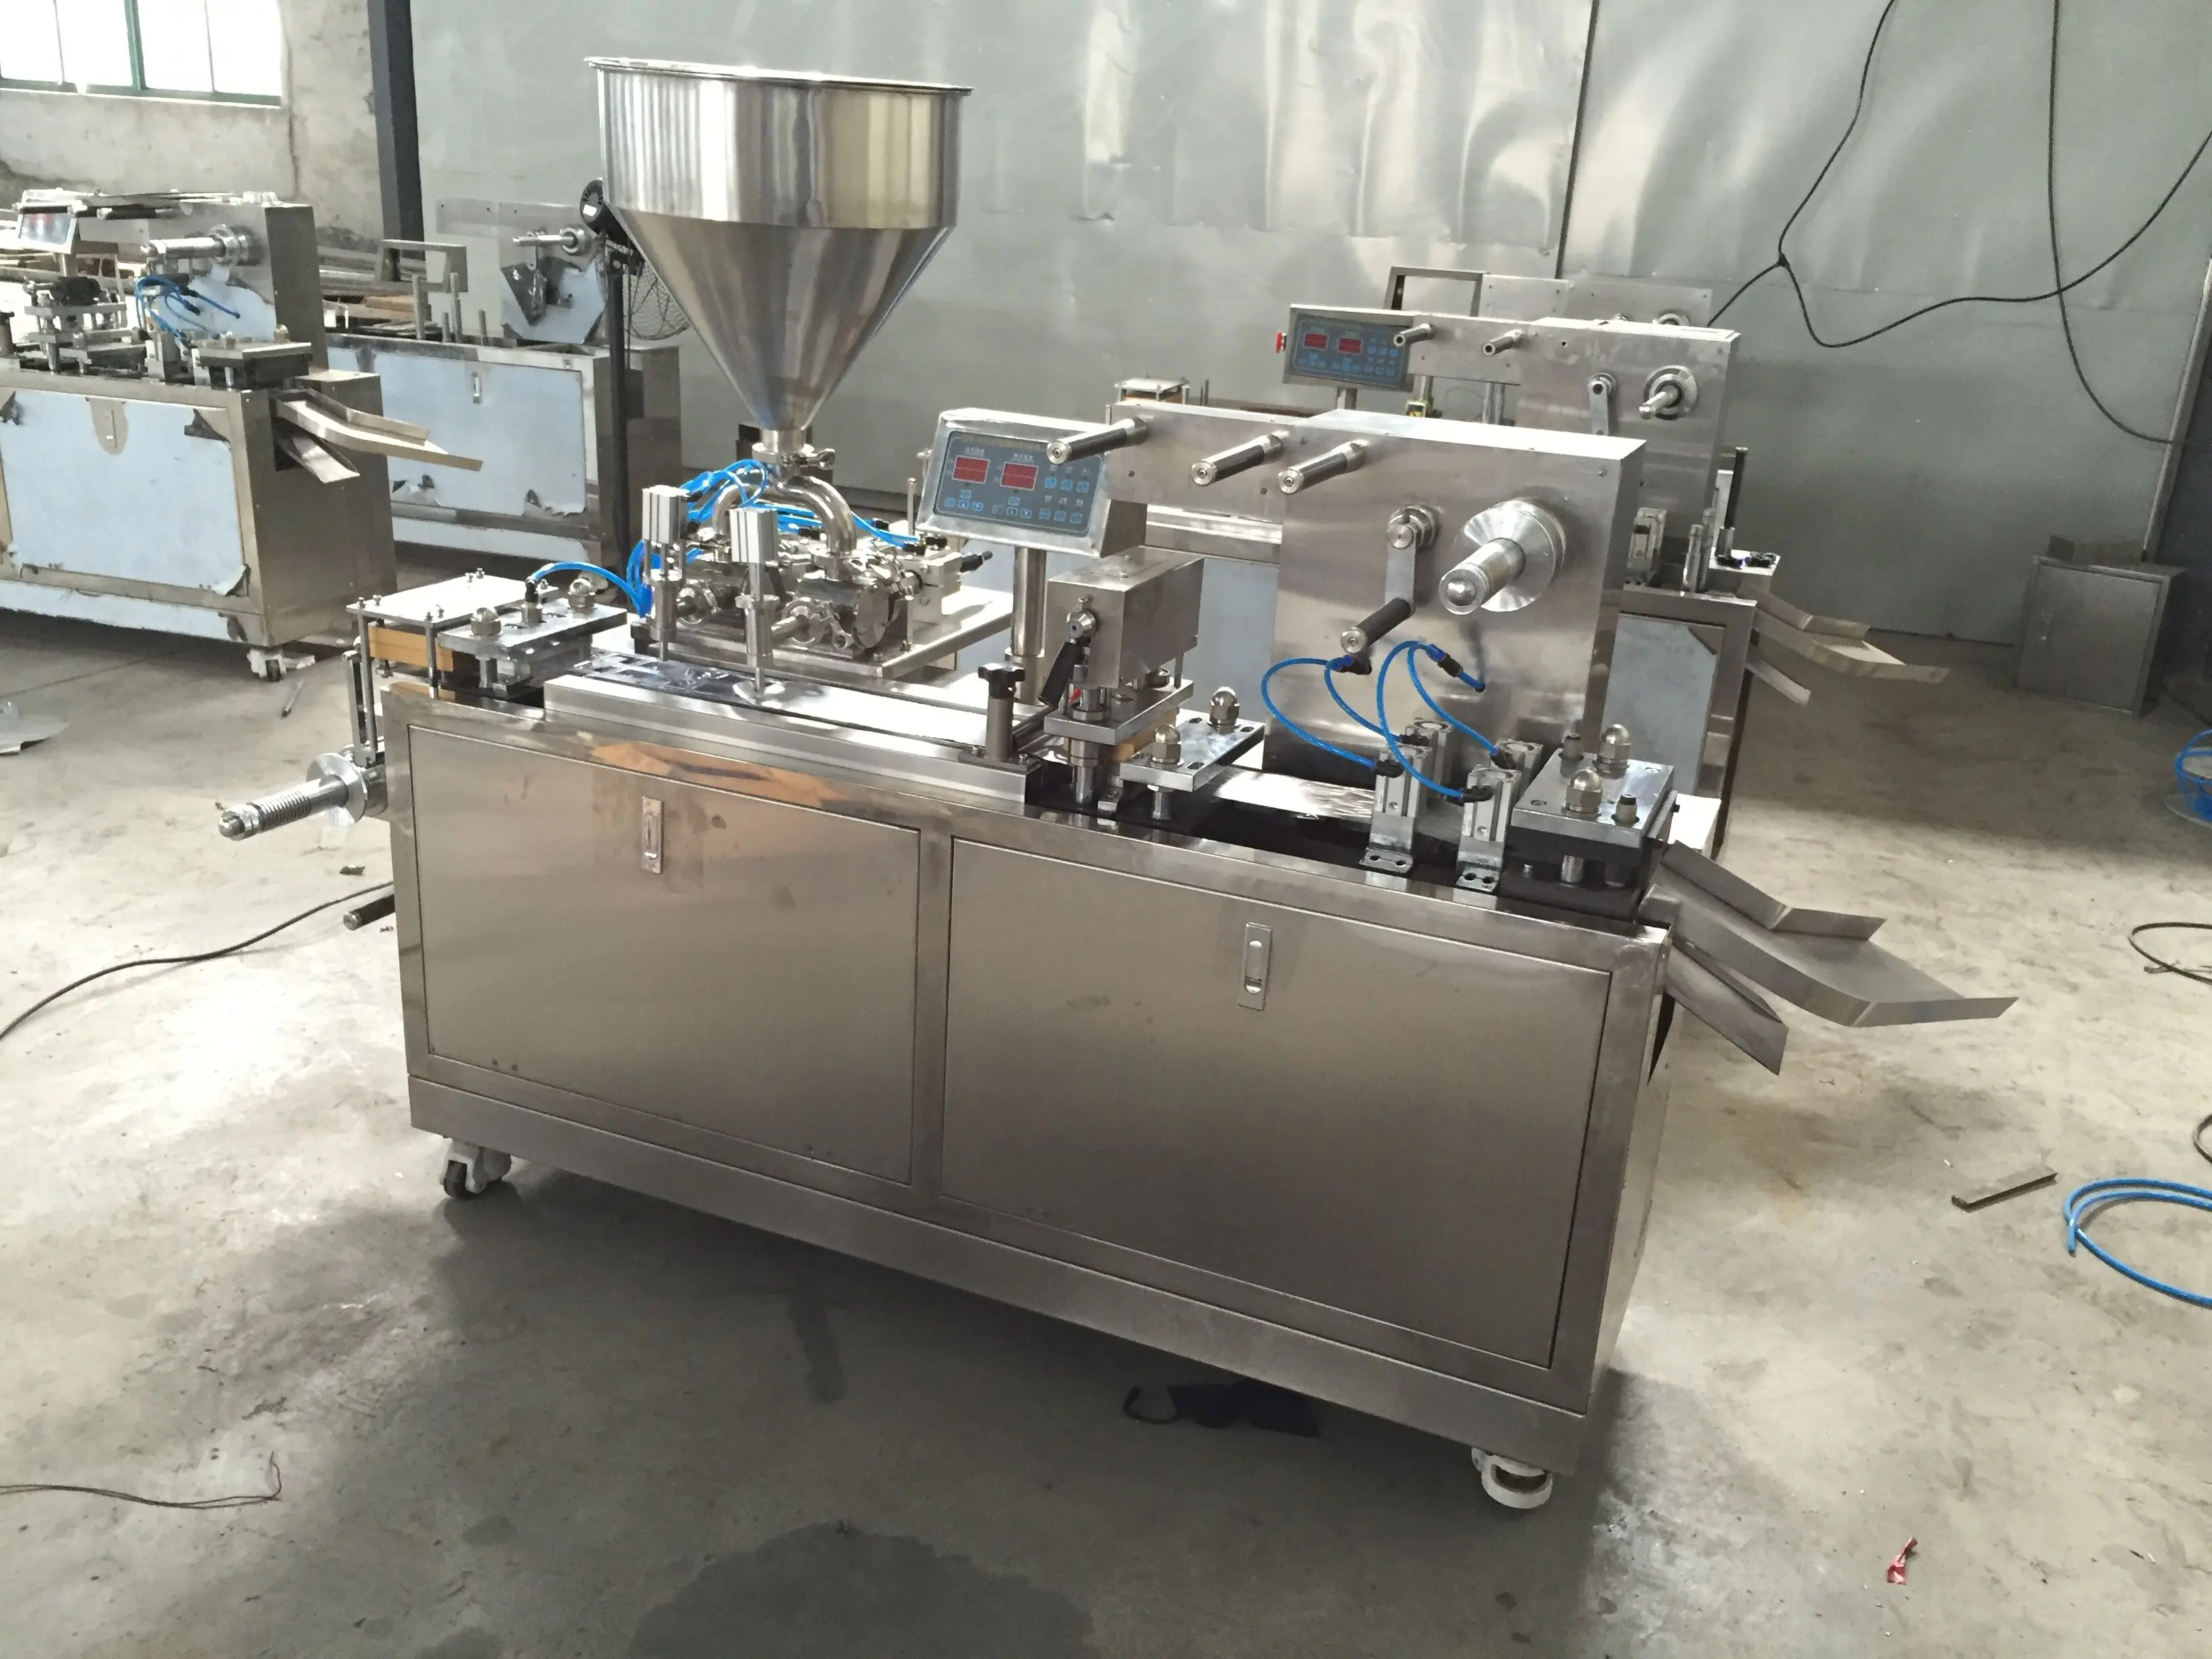 excellent punch and die set Punch And Die equipment for cosmetic factory